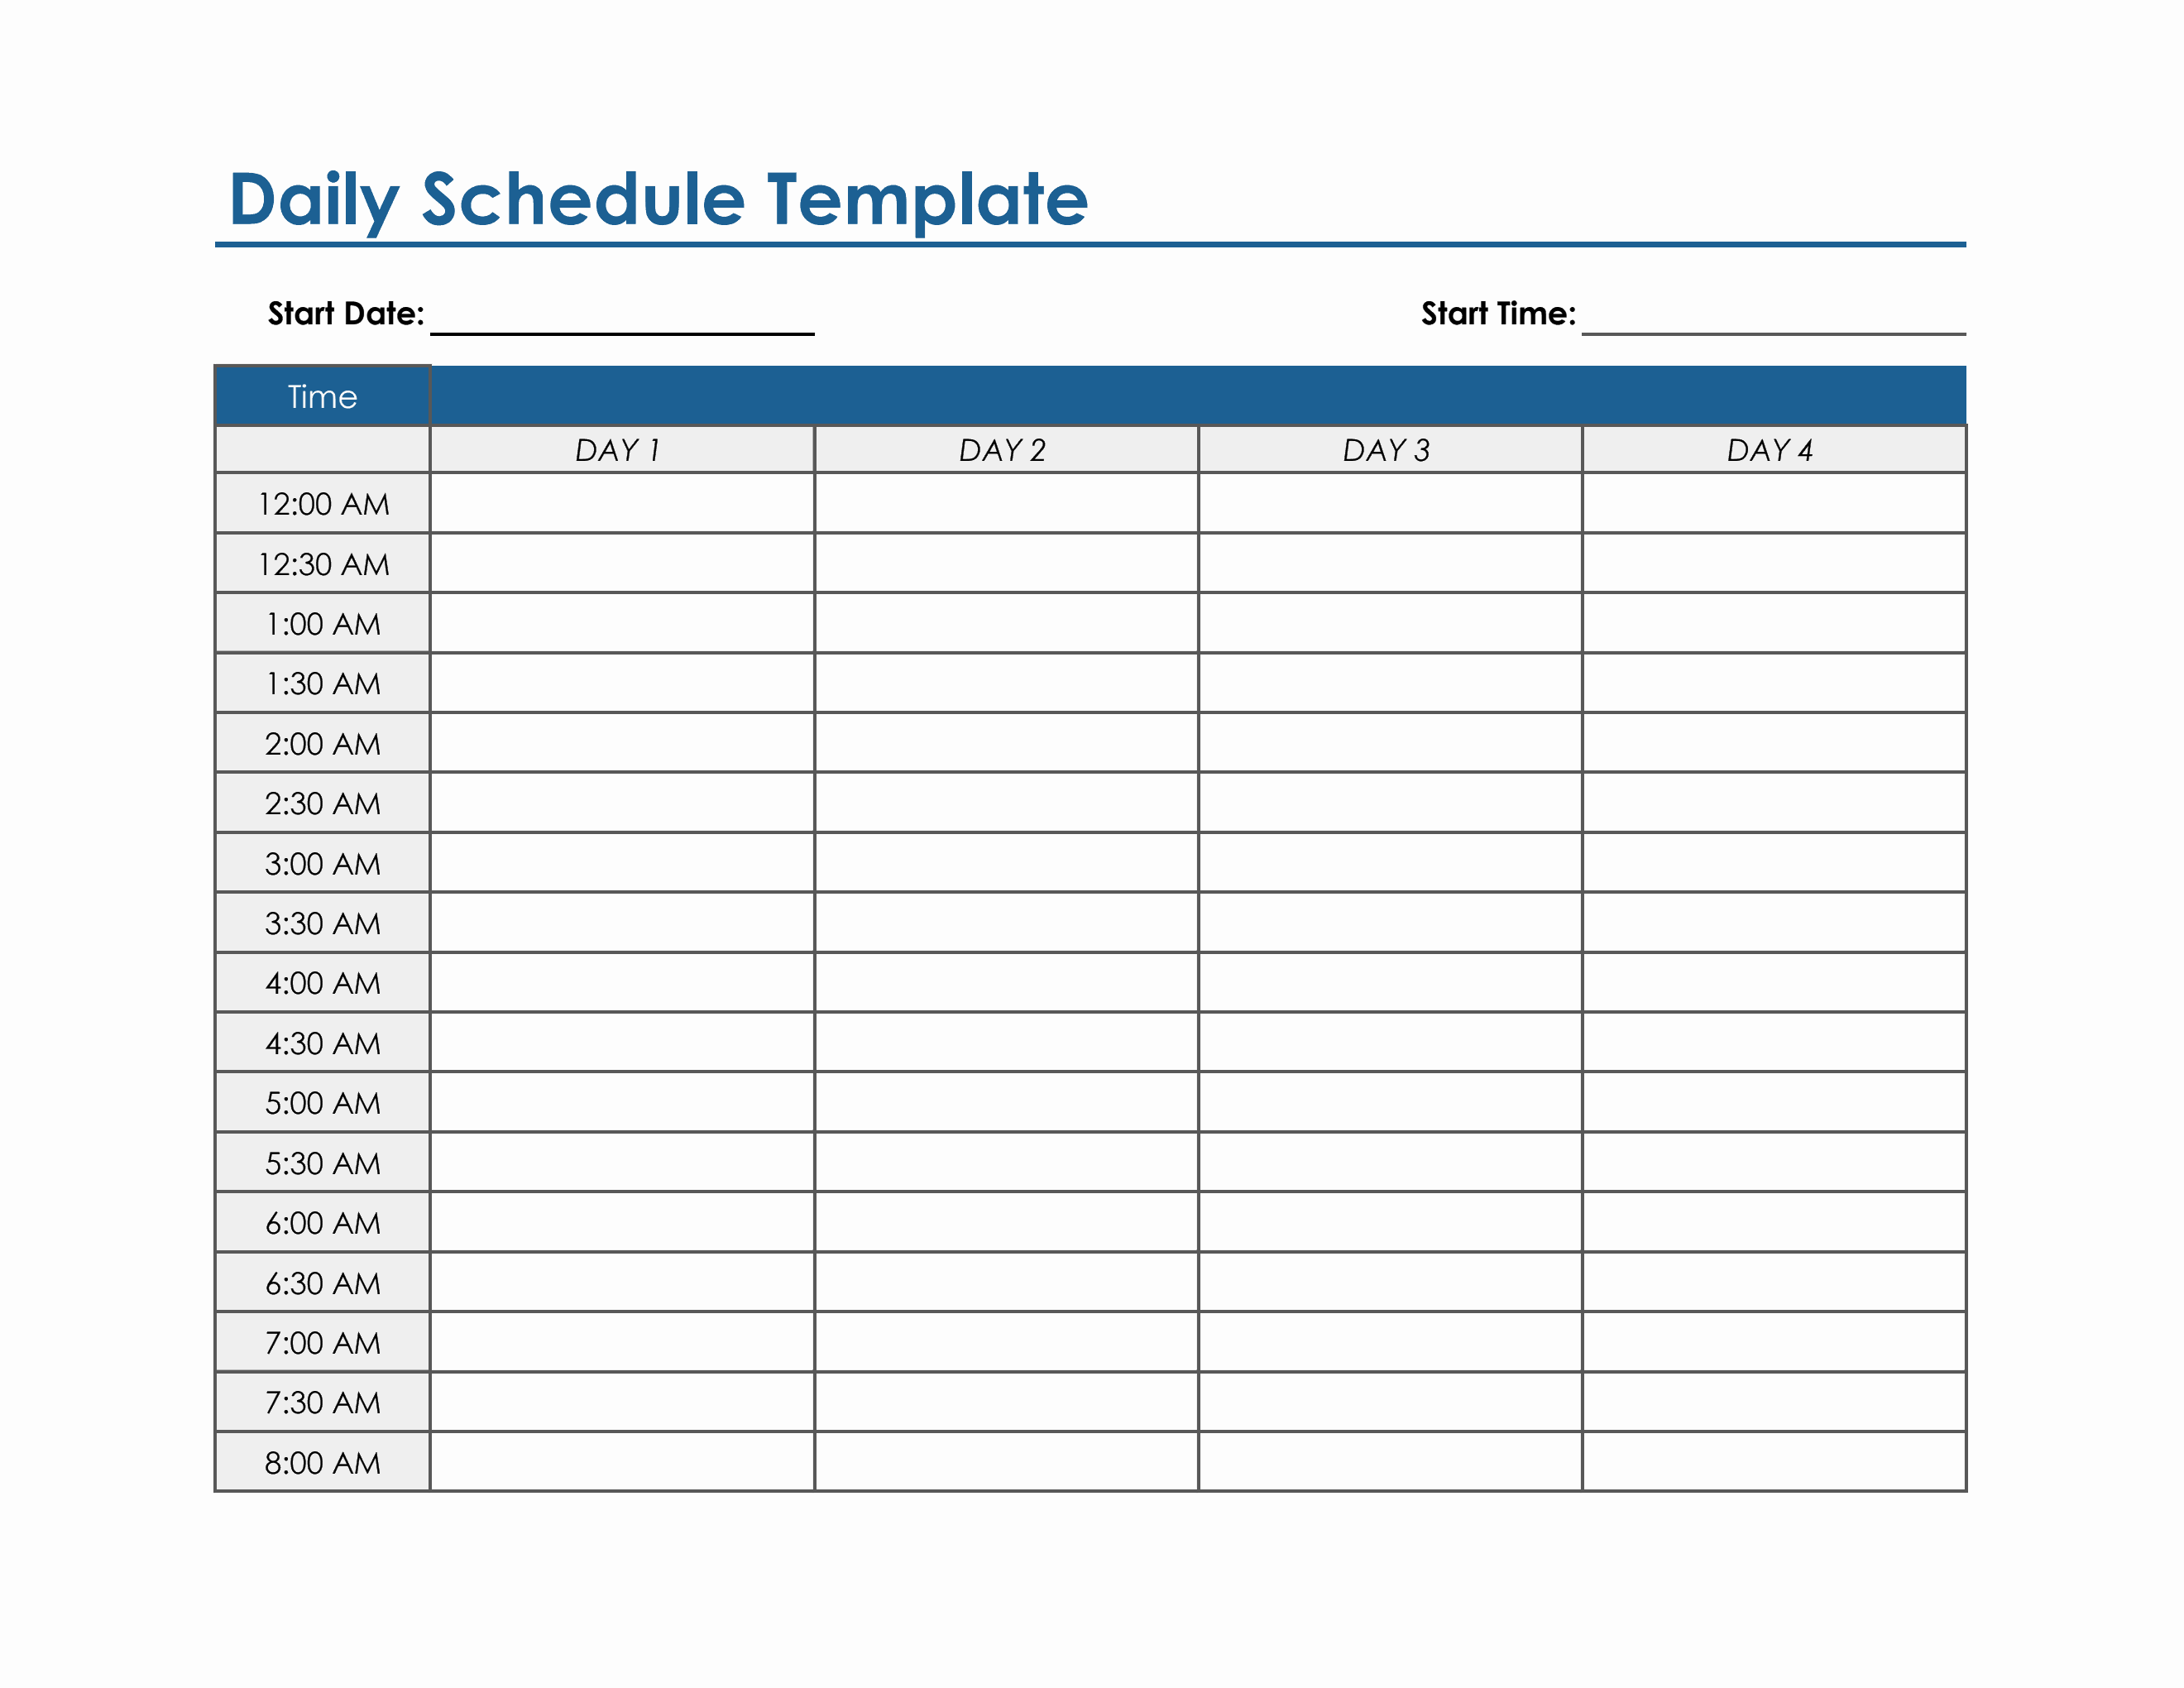 daily-schedule-template-in-excel